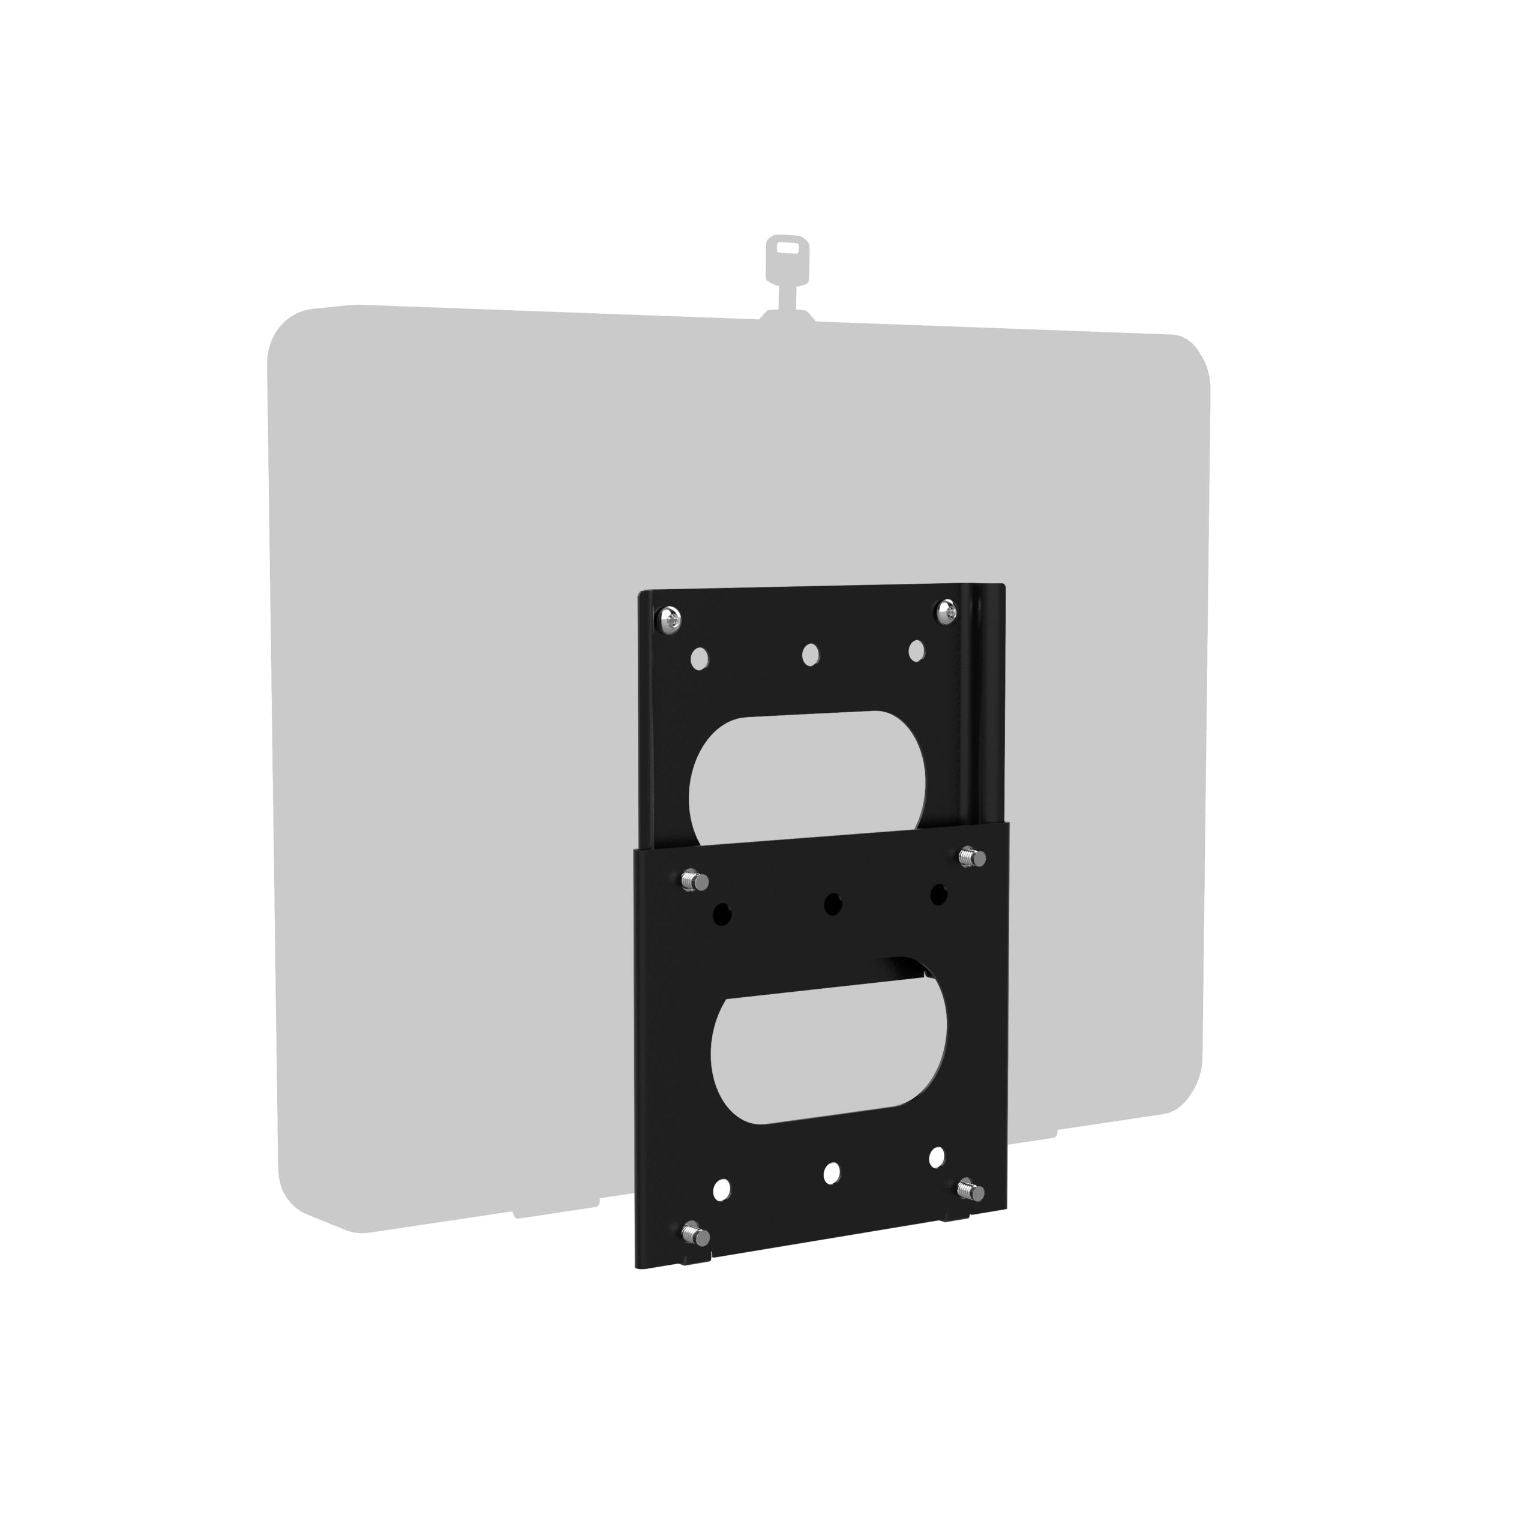 Quick-Detach Security VESA Plate Slide for Museums, Galleries, Trade Shows & more